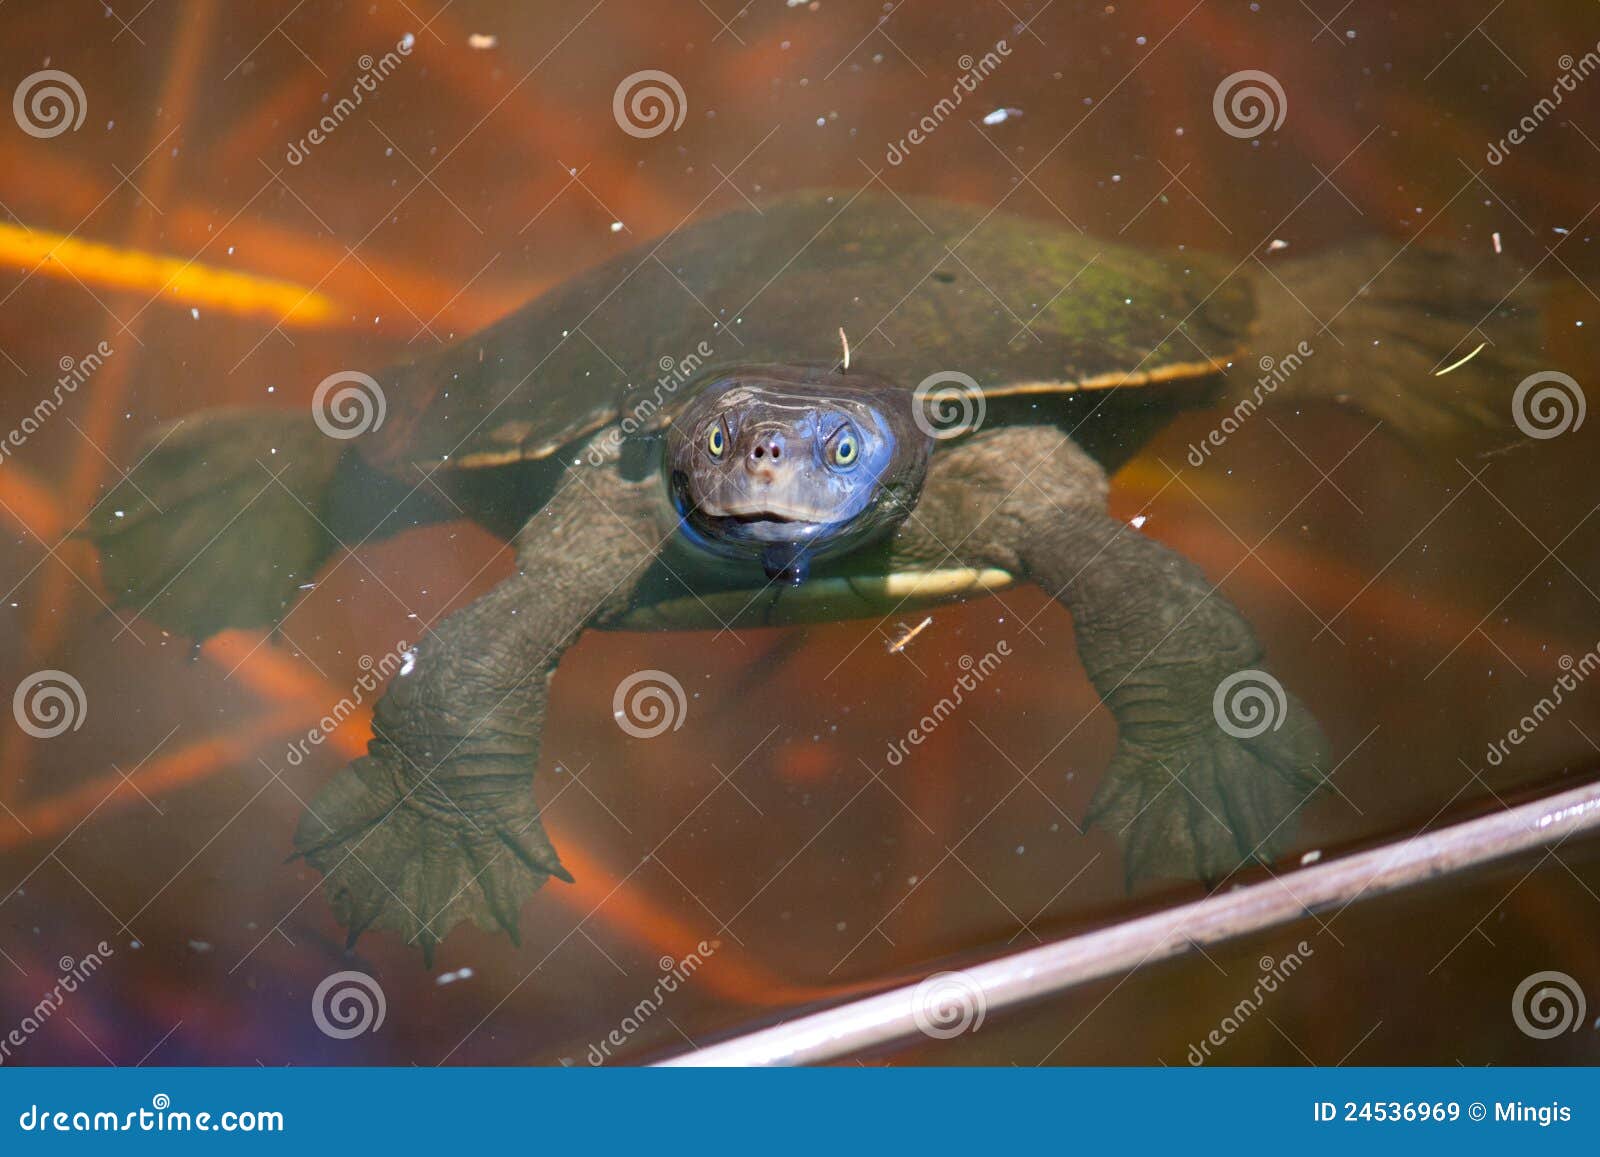 Turtle swimming in pond stock image. Image of reptile - 24536969